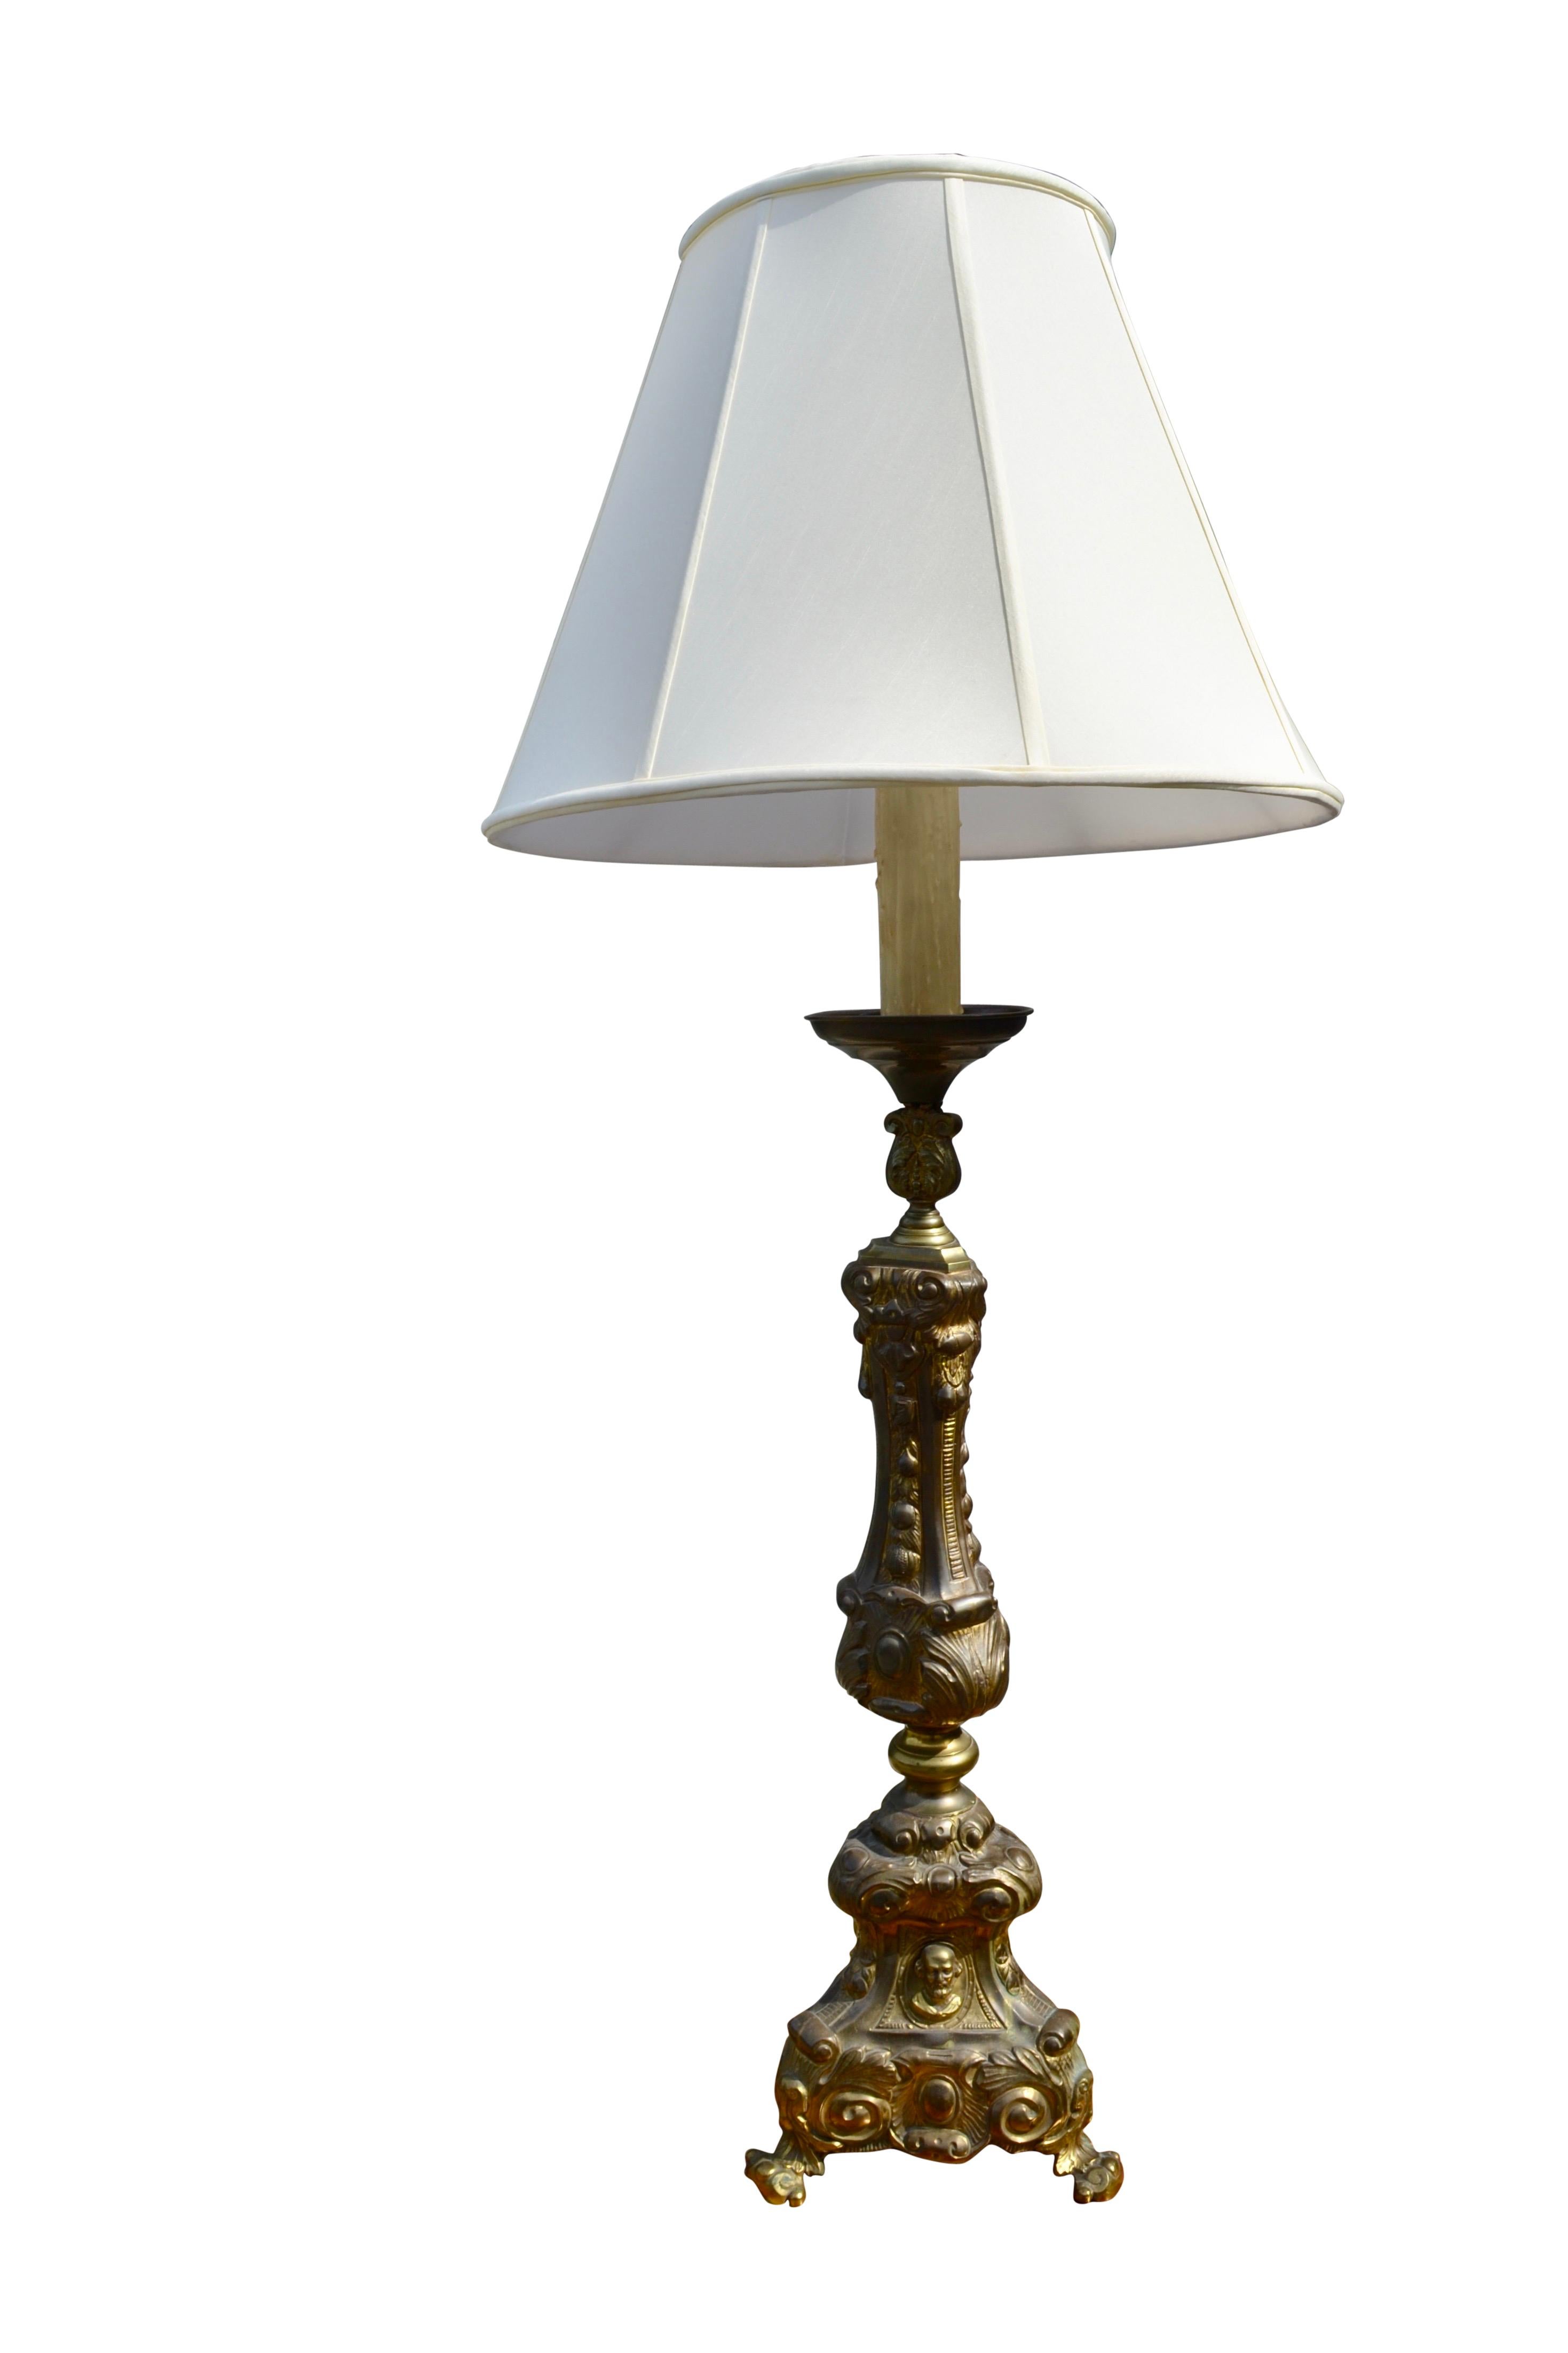 A large hollow triangular brass church candlestick now converted into a lamp. There are four sections of assembled brass excluding a top cup which holds a 10